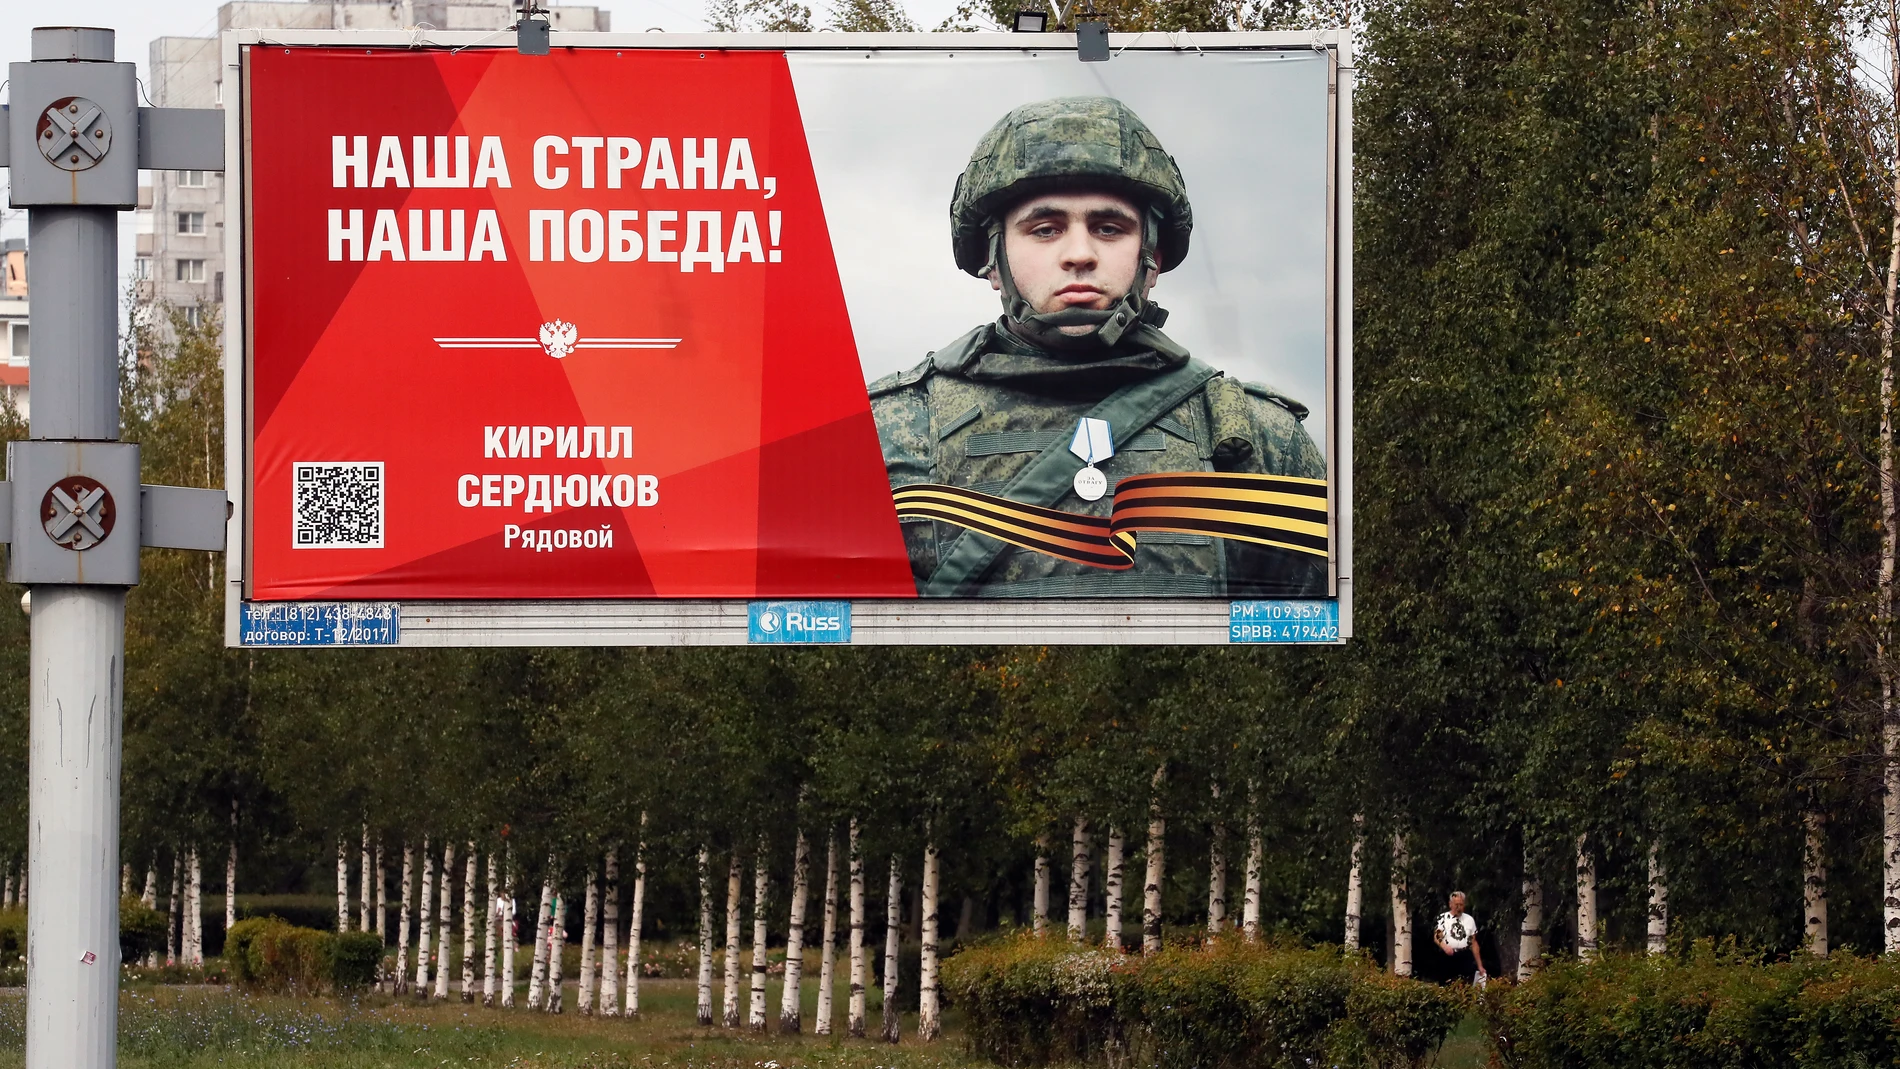 St. Petersburg (Russian Federation), 28/08/2023.- People walk past a poster with an image of a Russian serviceman and the words 'Our Country is Our Victory' in St. Petersburg, Russia, 28 August 2023. On 24 February 2022 Russian troops entered the Ukrainian territory in what the Russian president declared a 'Special Military Operation', starting an armed conflict. (Rusia, Ucrania, San Petersburgo) EFE/EPA/ANATOLY MALTSEV 